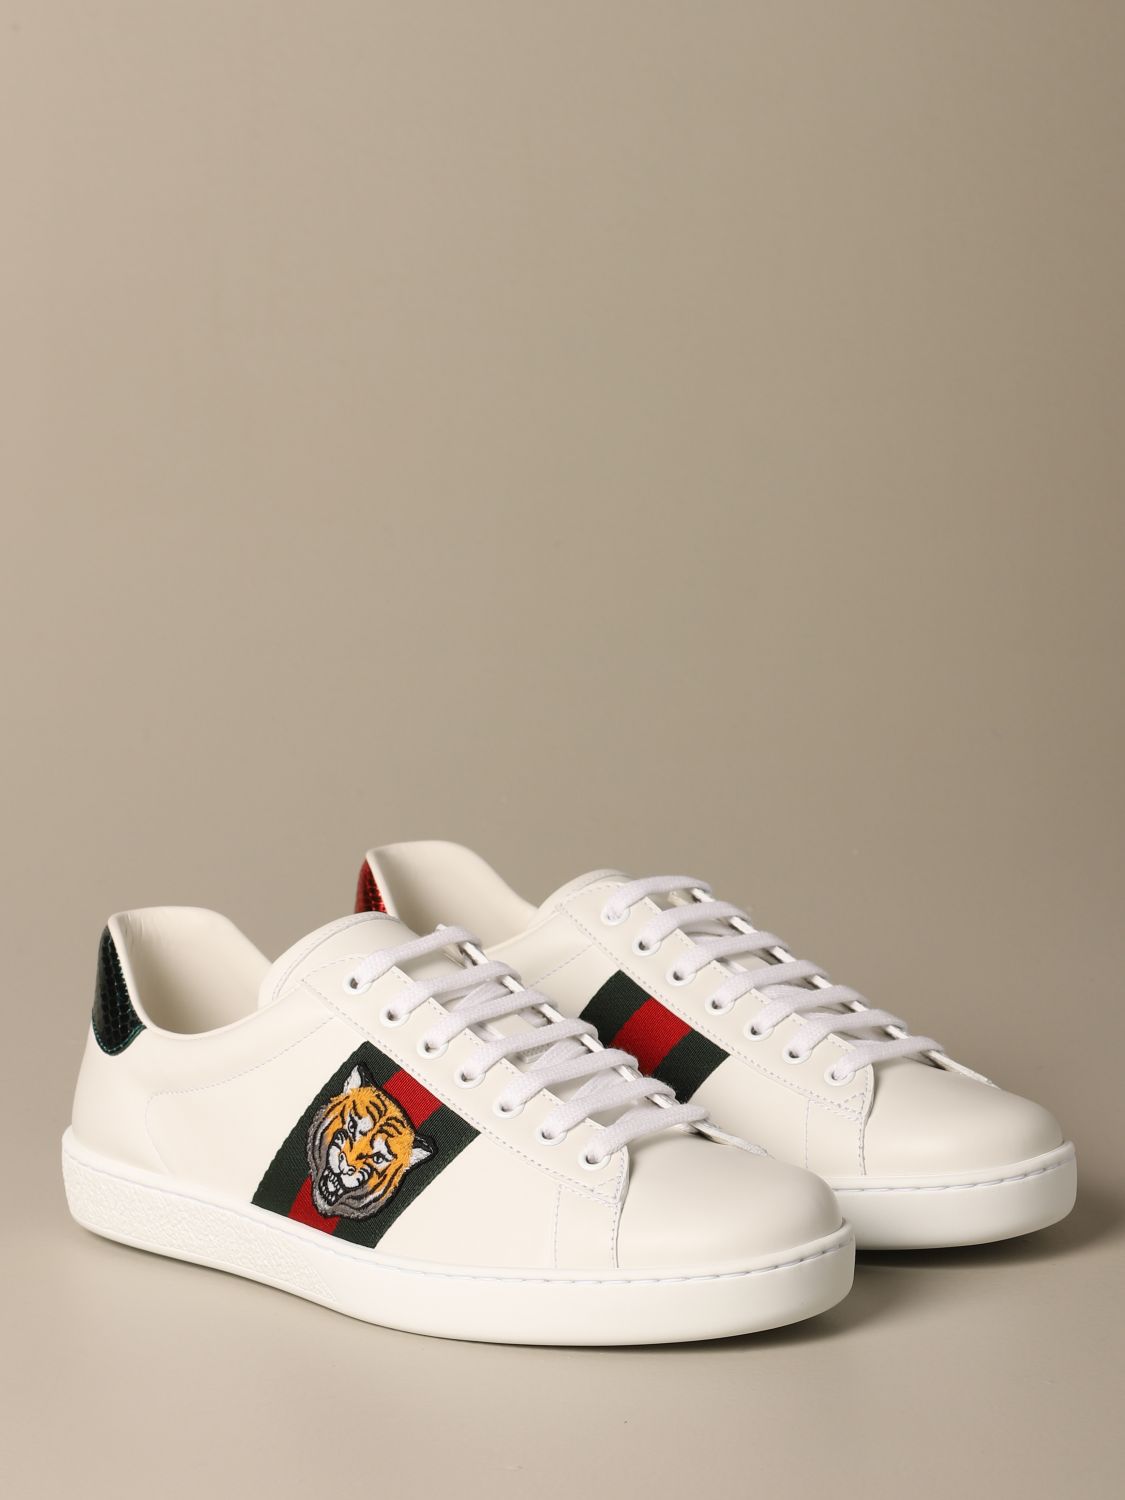 GUCCI: Ace leather with Web bands and tiger patch | Gucci Men White | Sneakers Gucci 457132 02JP0